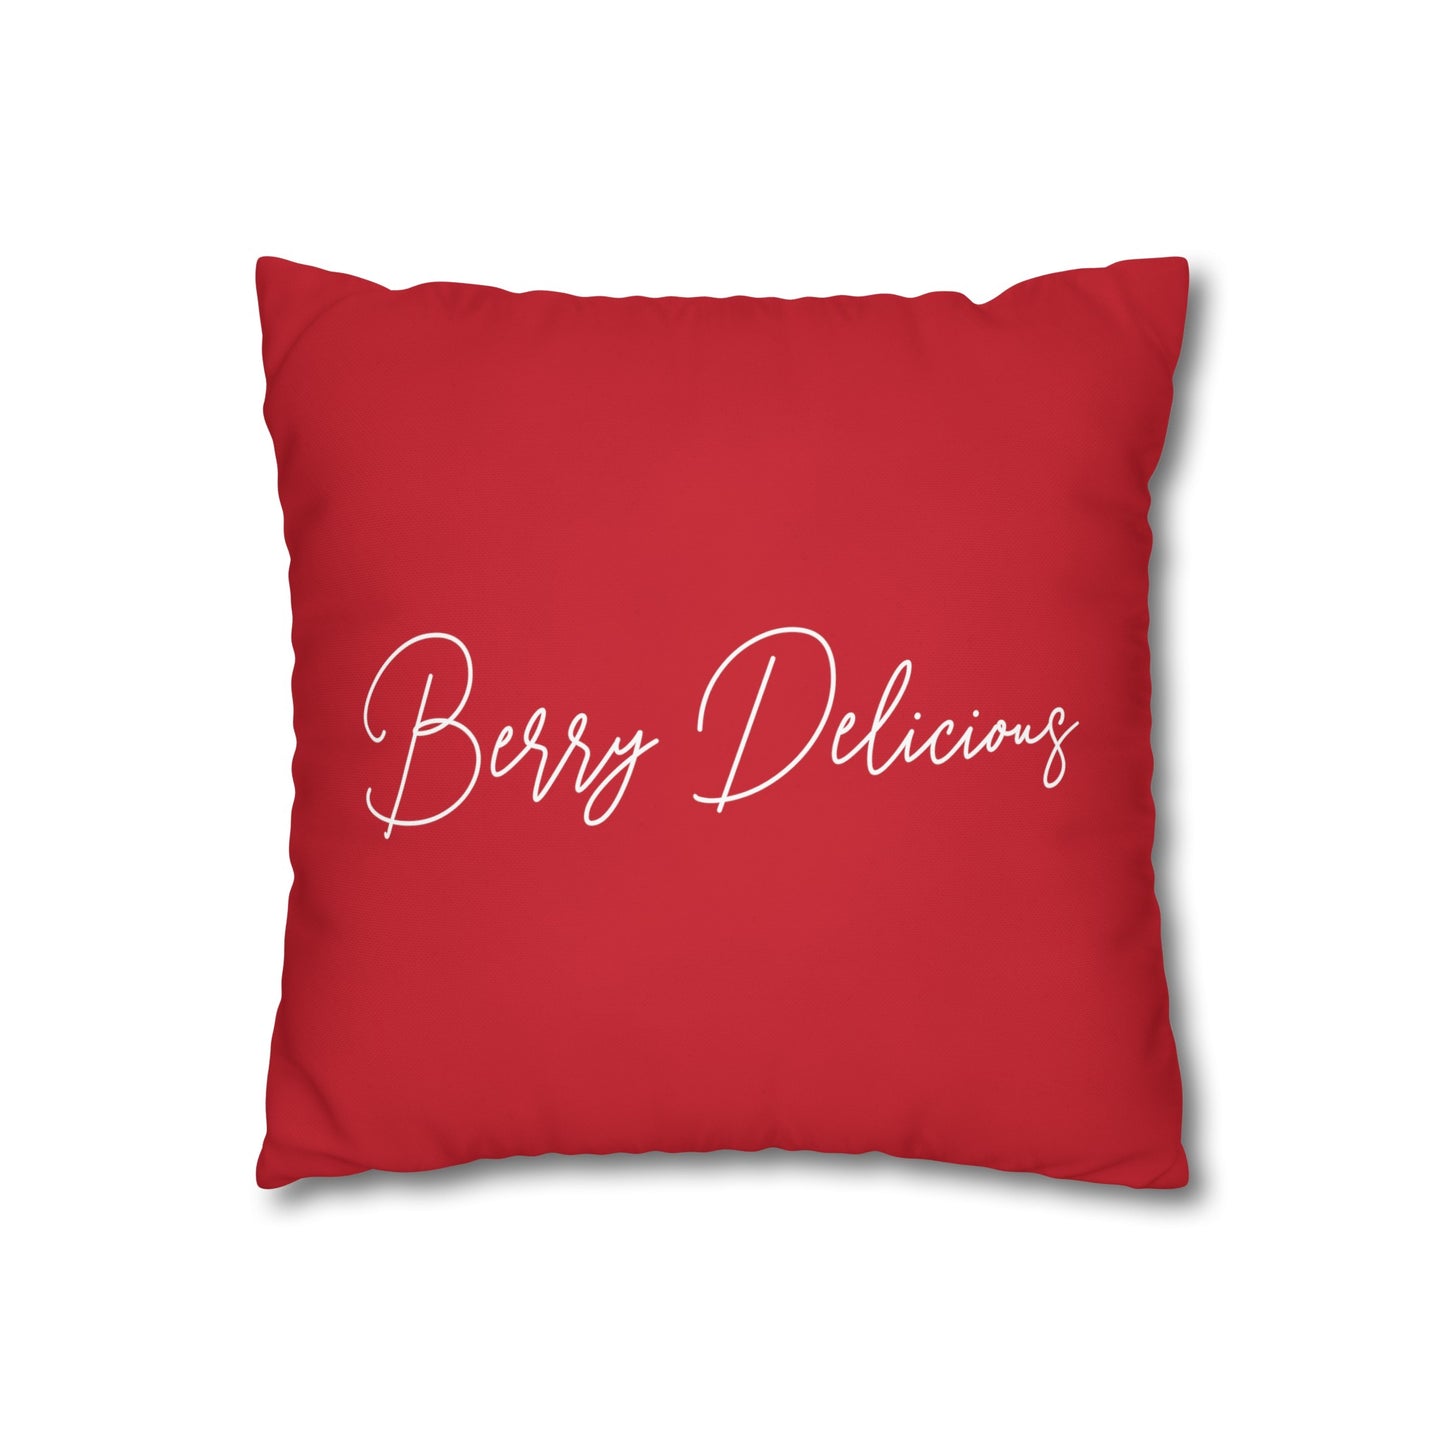 Berry Delicious Strawberry Cushion Cover